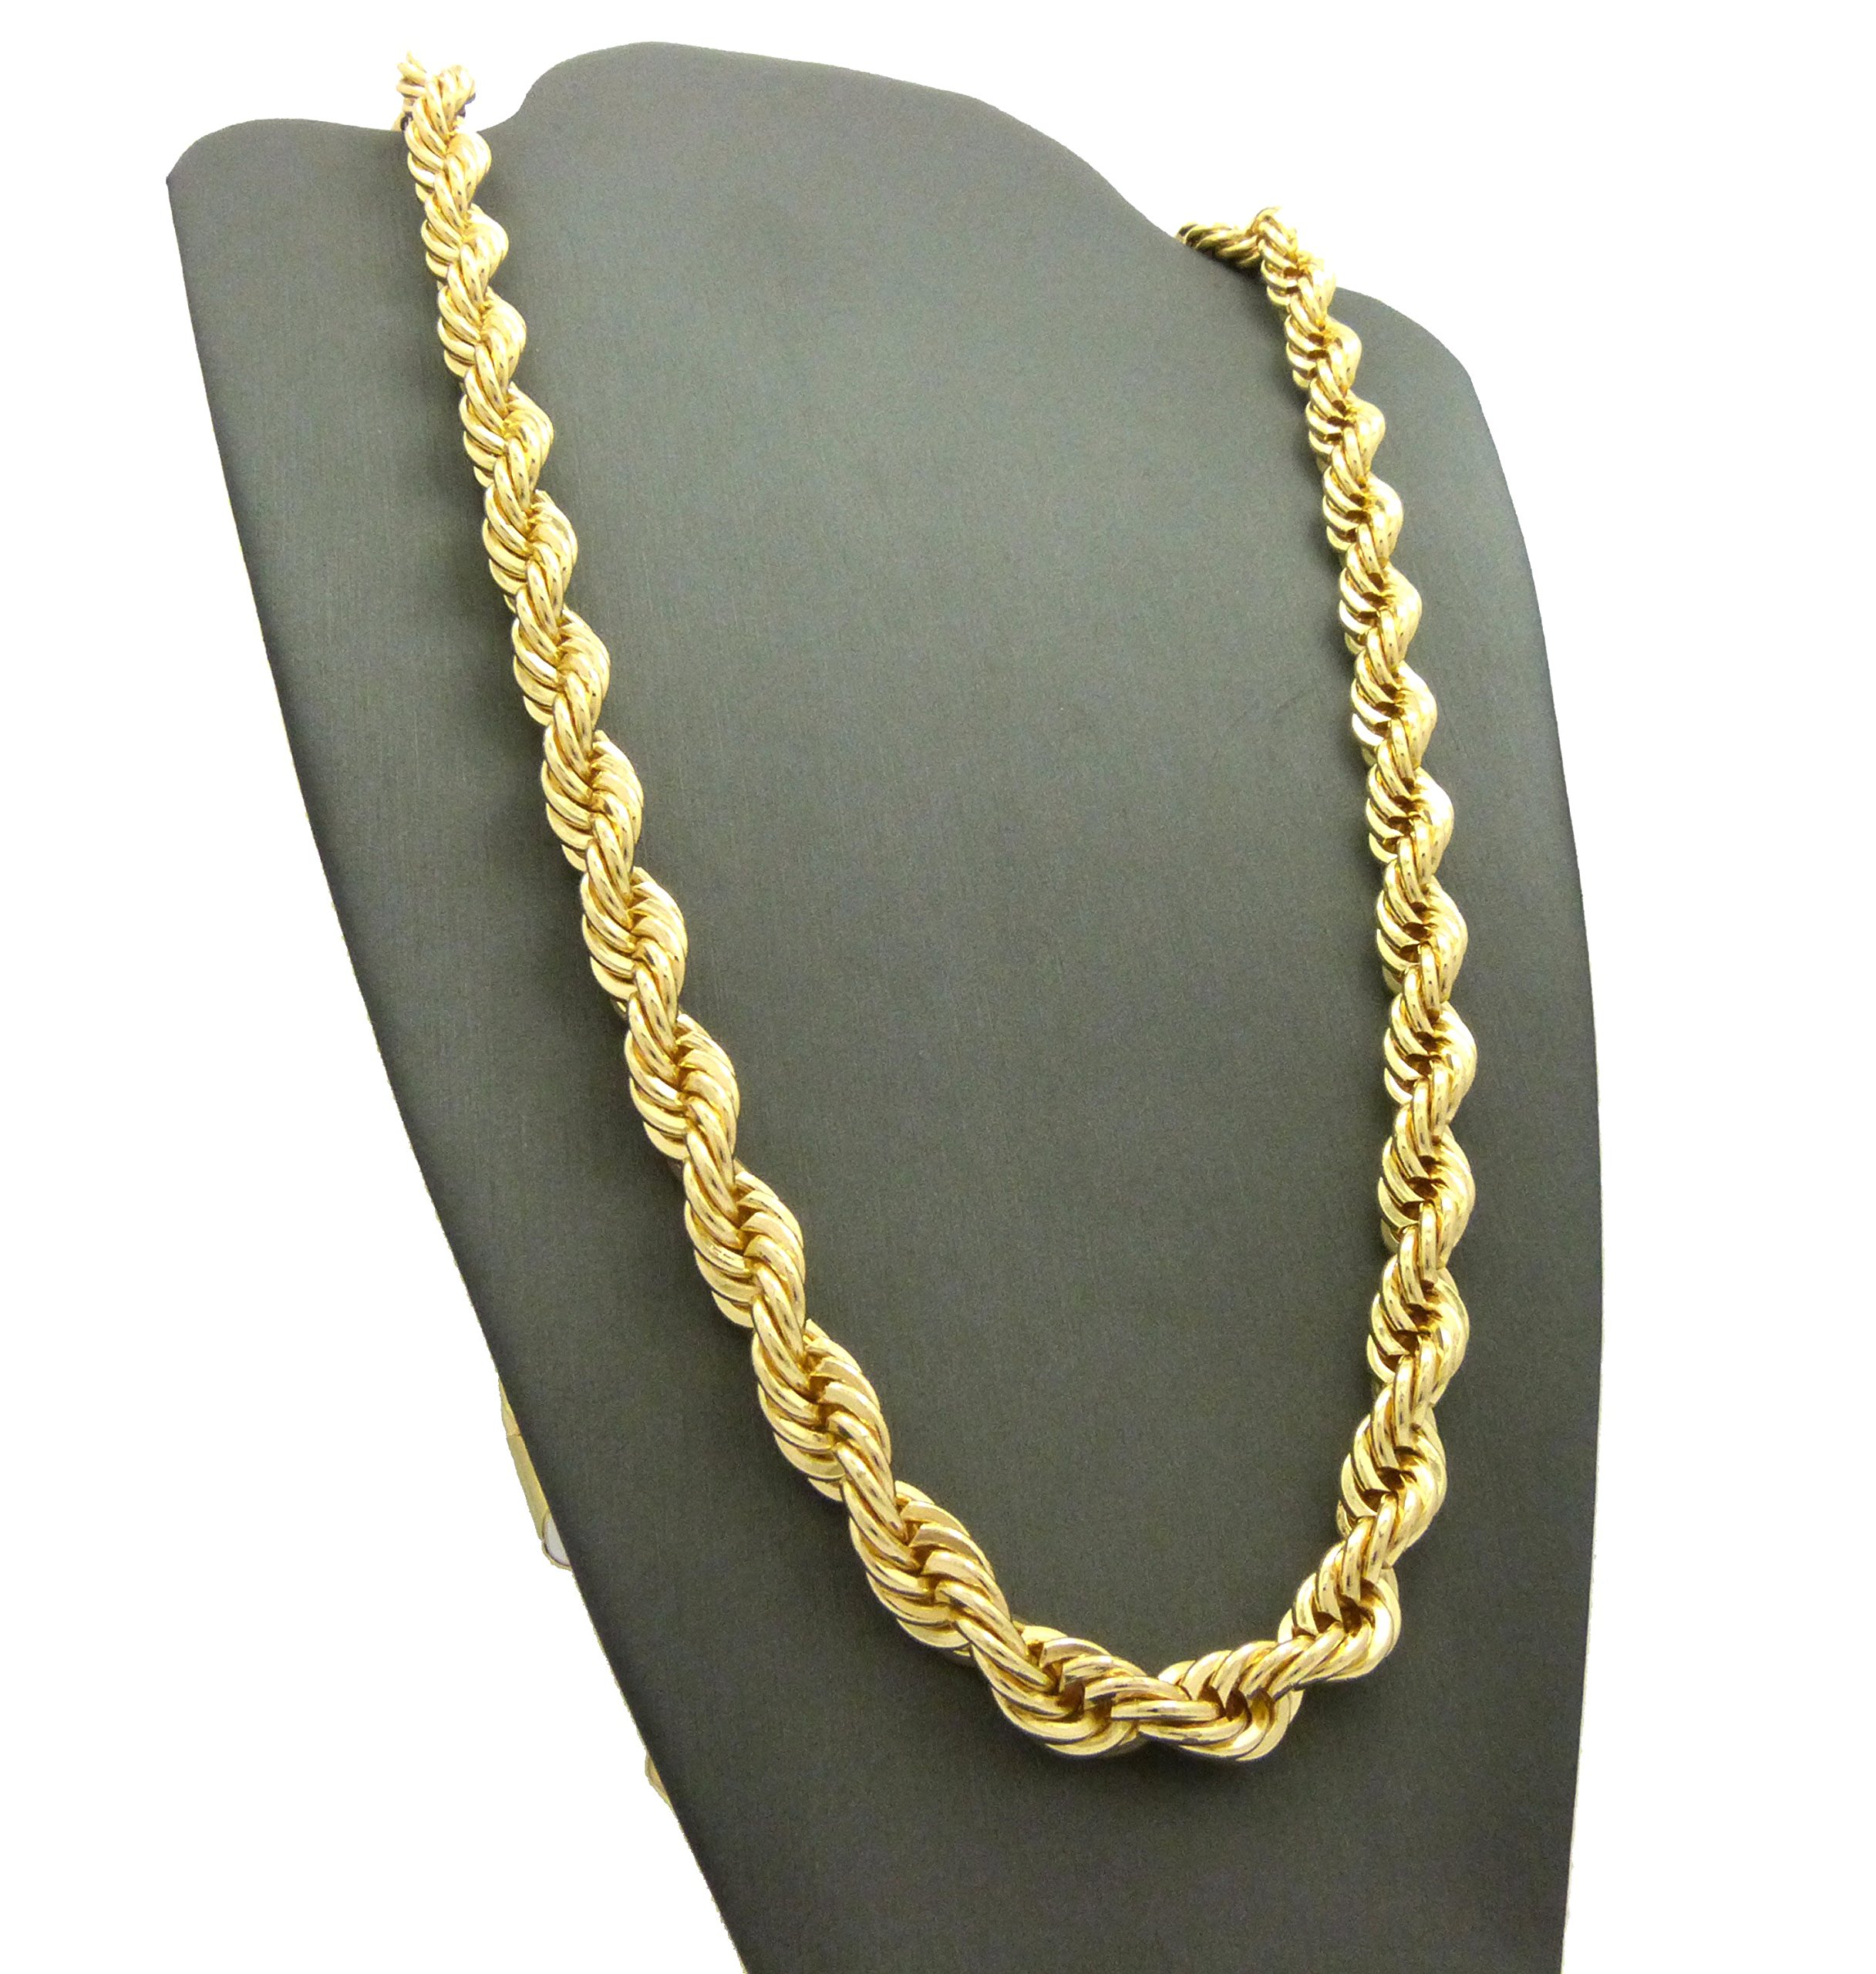 Fashion 21 Hip Hop 80' Unisex Rapper's 8, 10, 12mm Hollow Rope Chain Necklace in Gold, Silver Tone